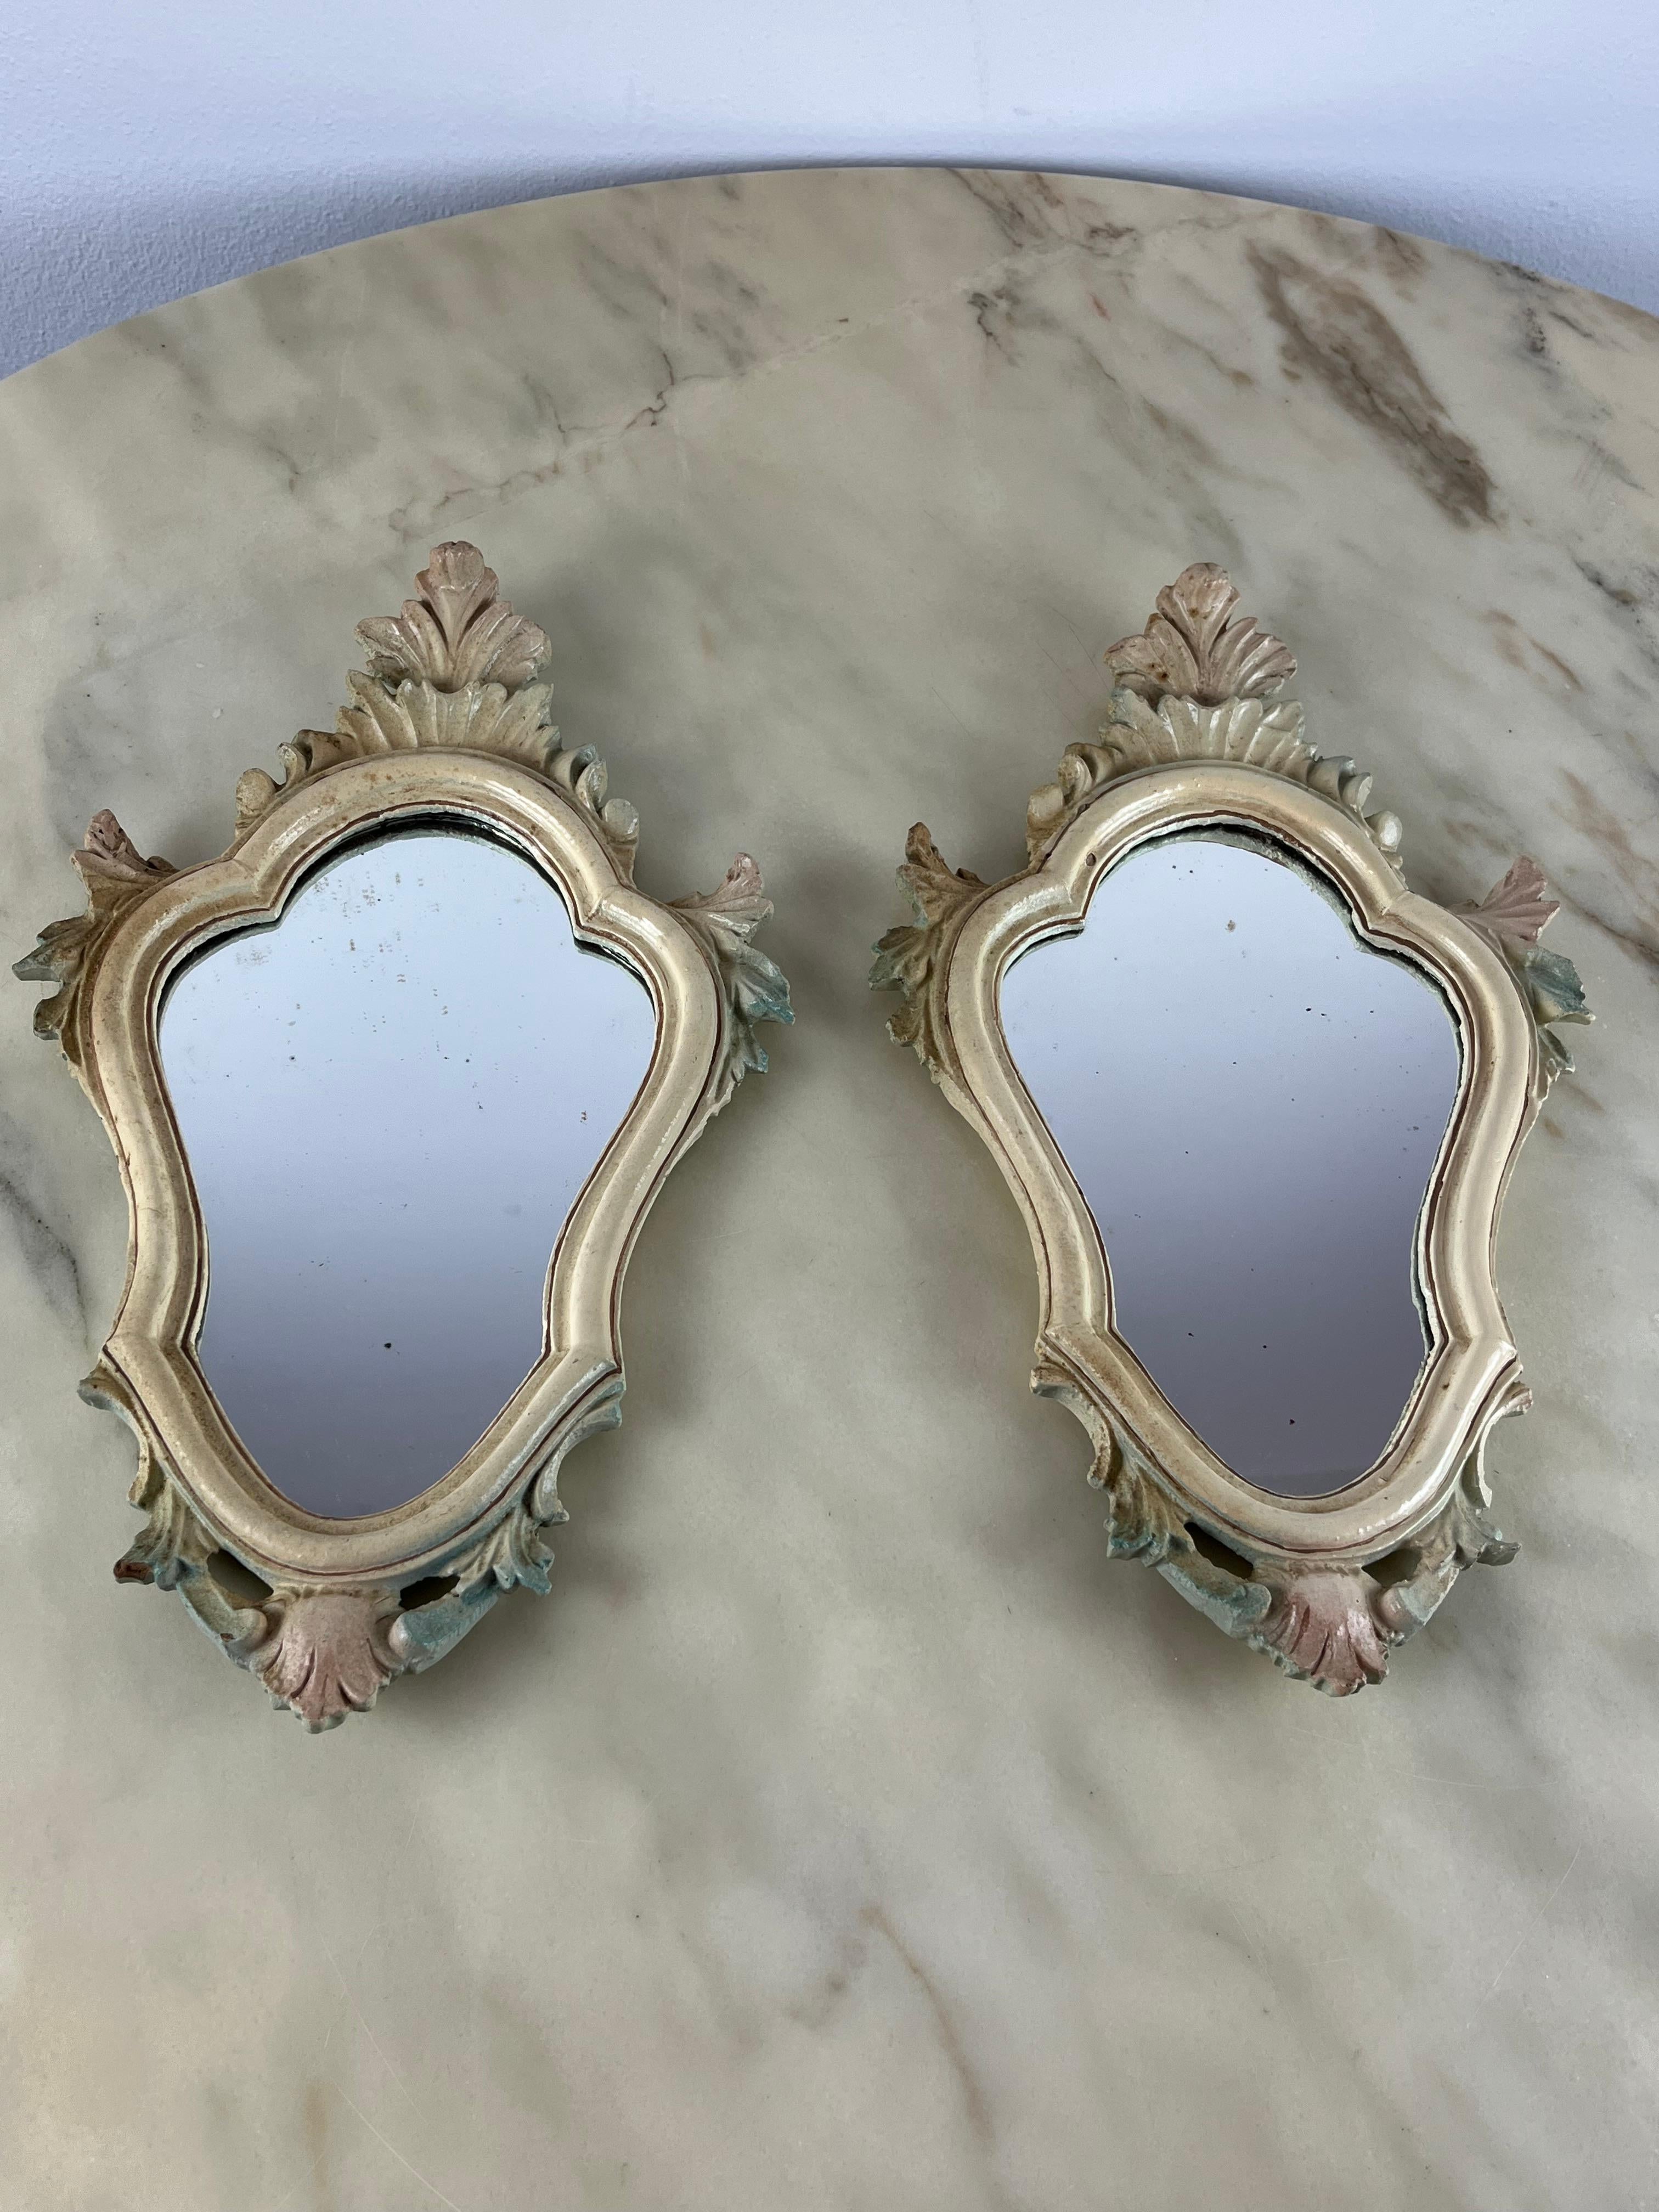 Pair of Venetian bedside mirrors, Italy, 1960s.
They belonged to my grandparents who had placed them on the bedside tables of their Venetian (Baroque) style bedroom. Italian production from the 60s. The mirrors show small signs of ageing, but I